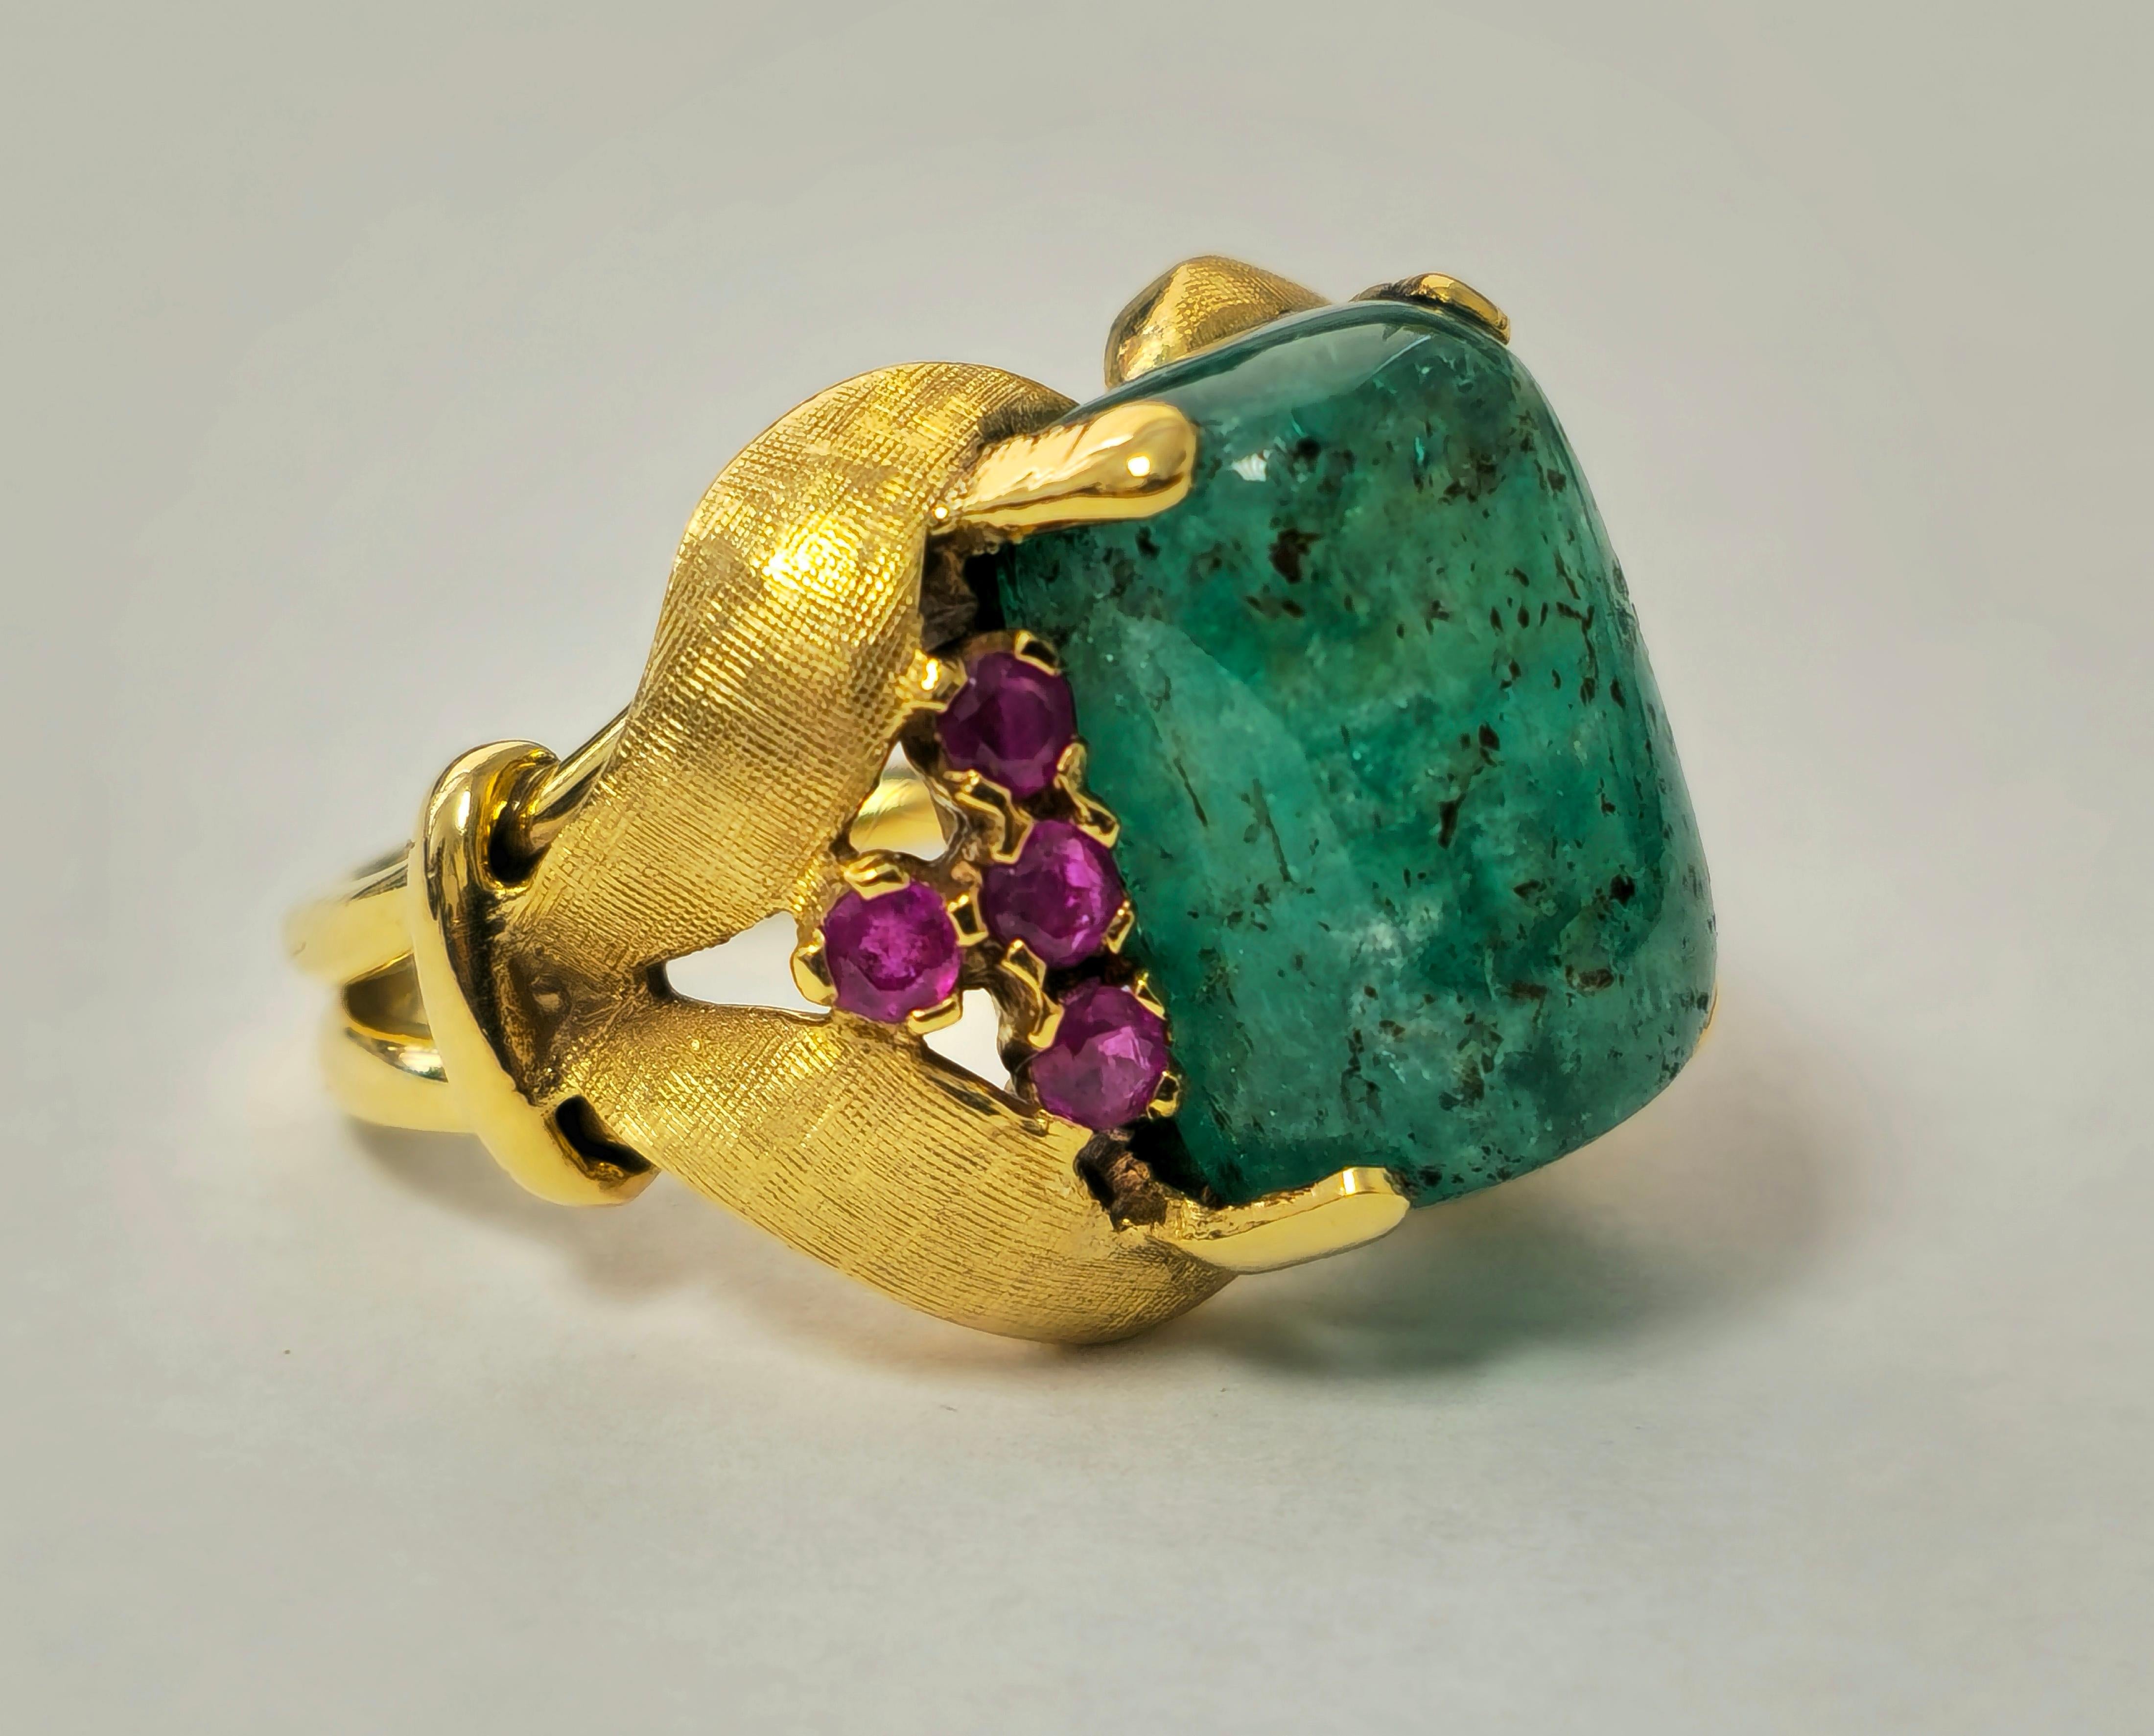 Rare 12.11 Carat Colombian Emerald & Ruby Ring in 14k Gold For Sale 1